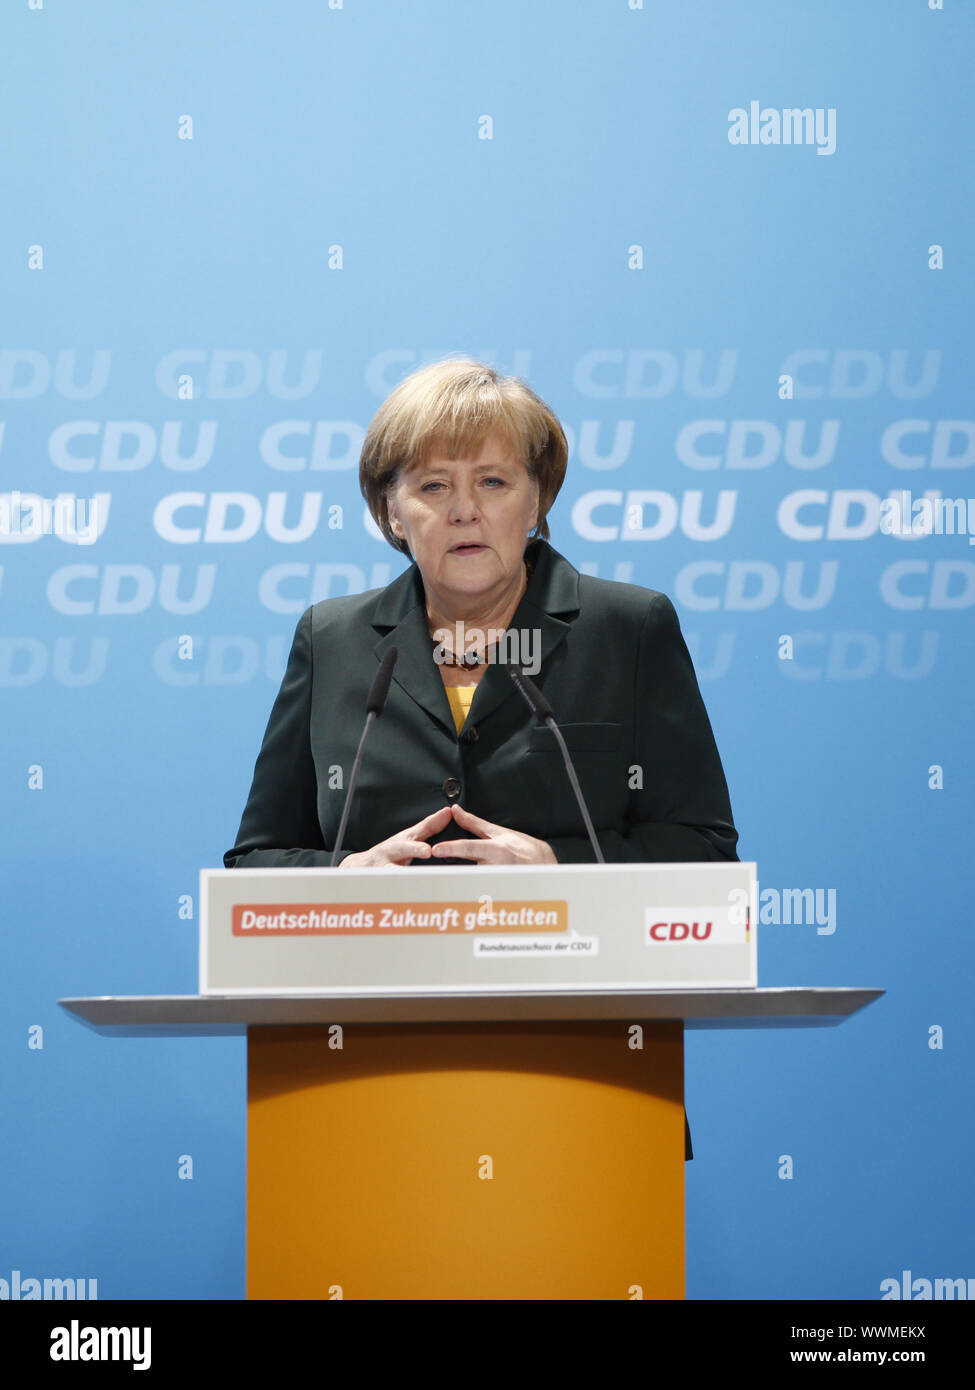 CDU and Merkel discussed the coalition contract in Berlin Stock Photo